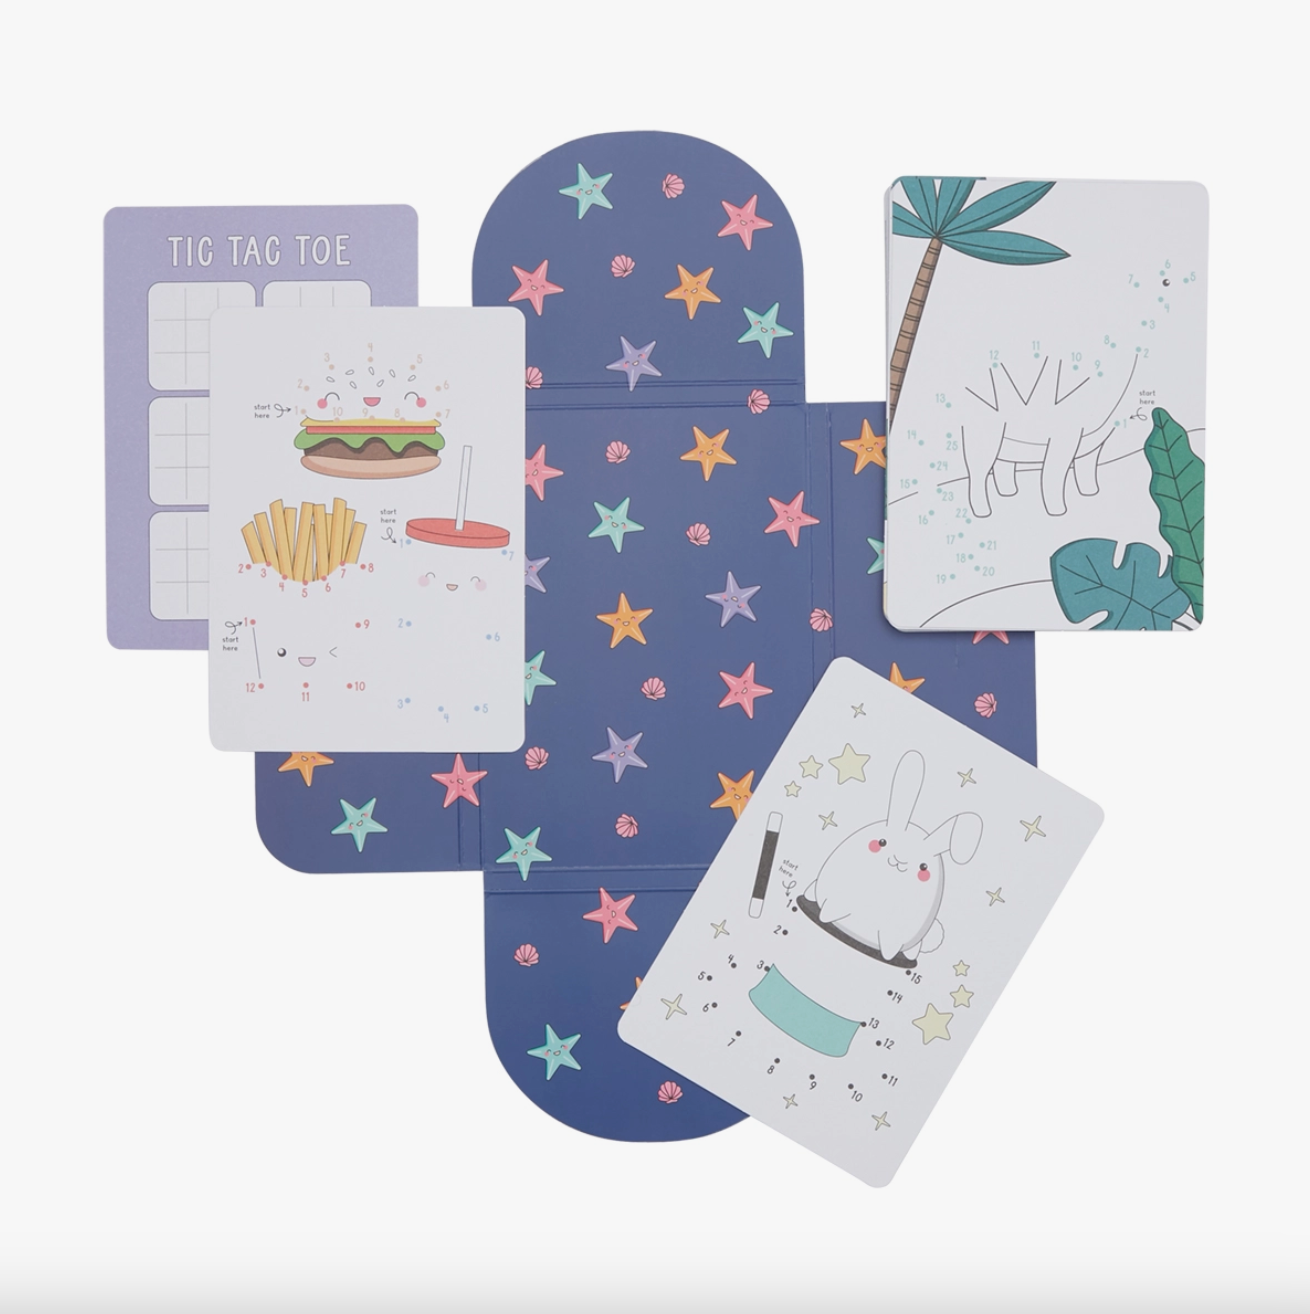 Connect the Dots Activity Cards - Set of 24